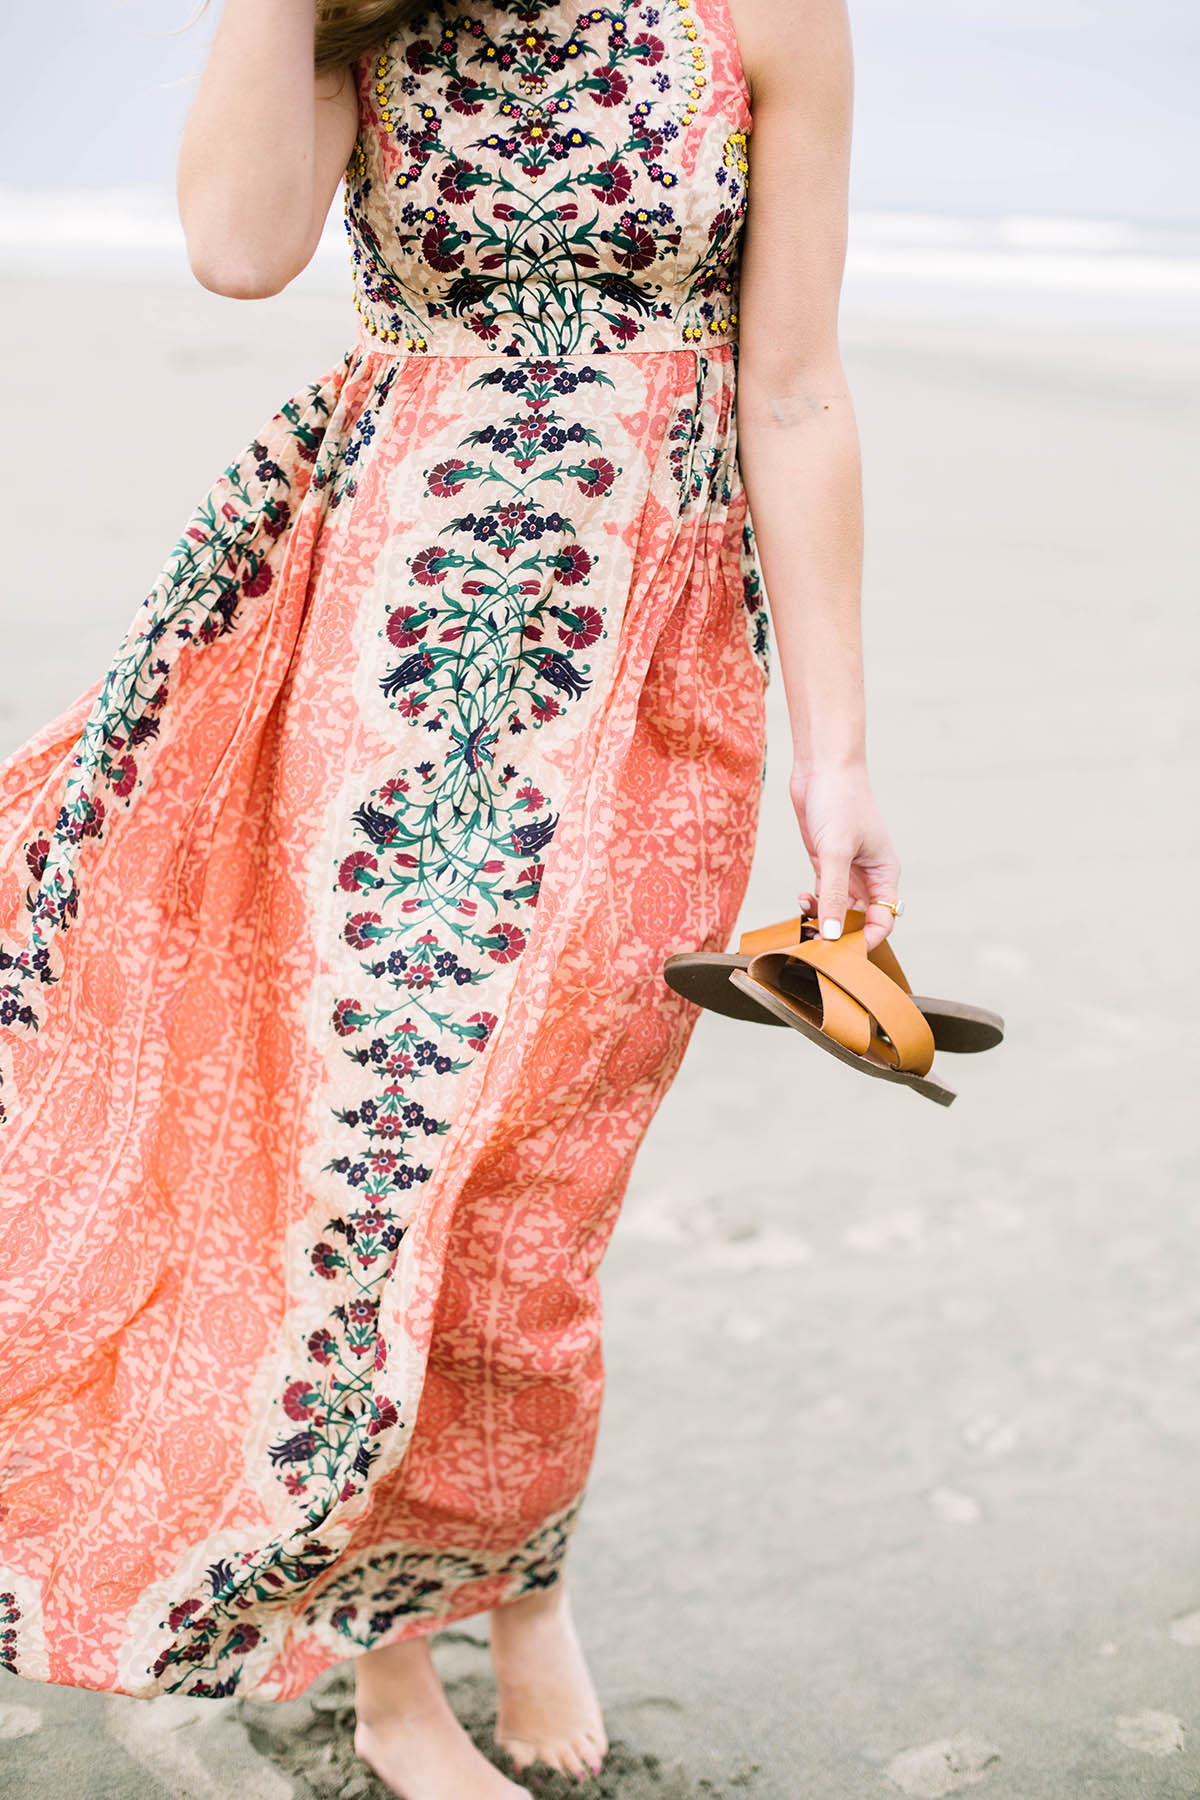 What To Wear For A Beach Wedding
 What to Wear to a "Beach Formal" Wedding – Advice from a